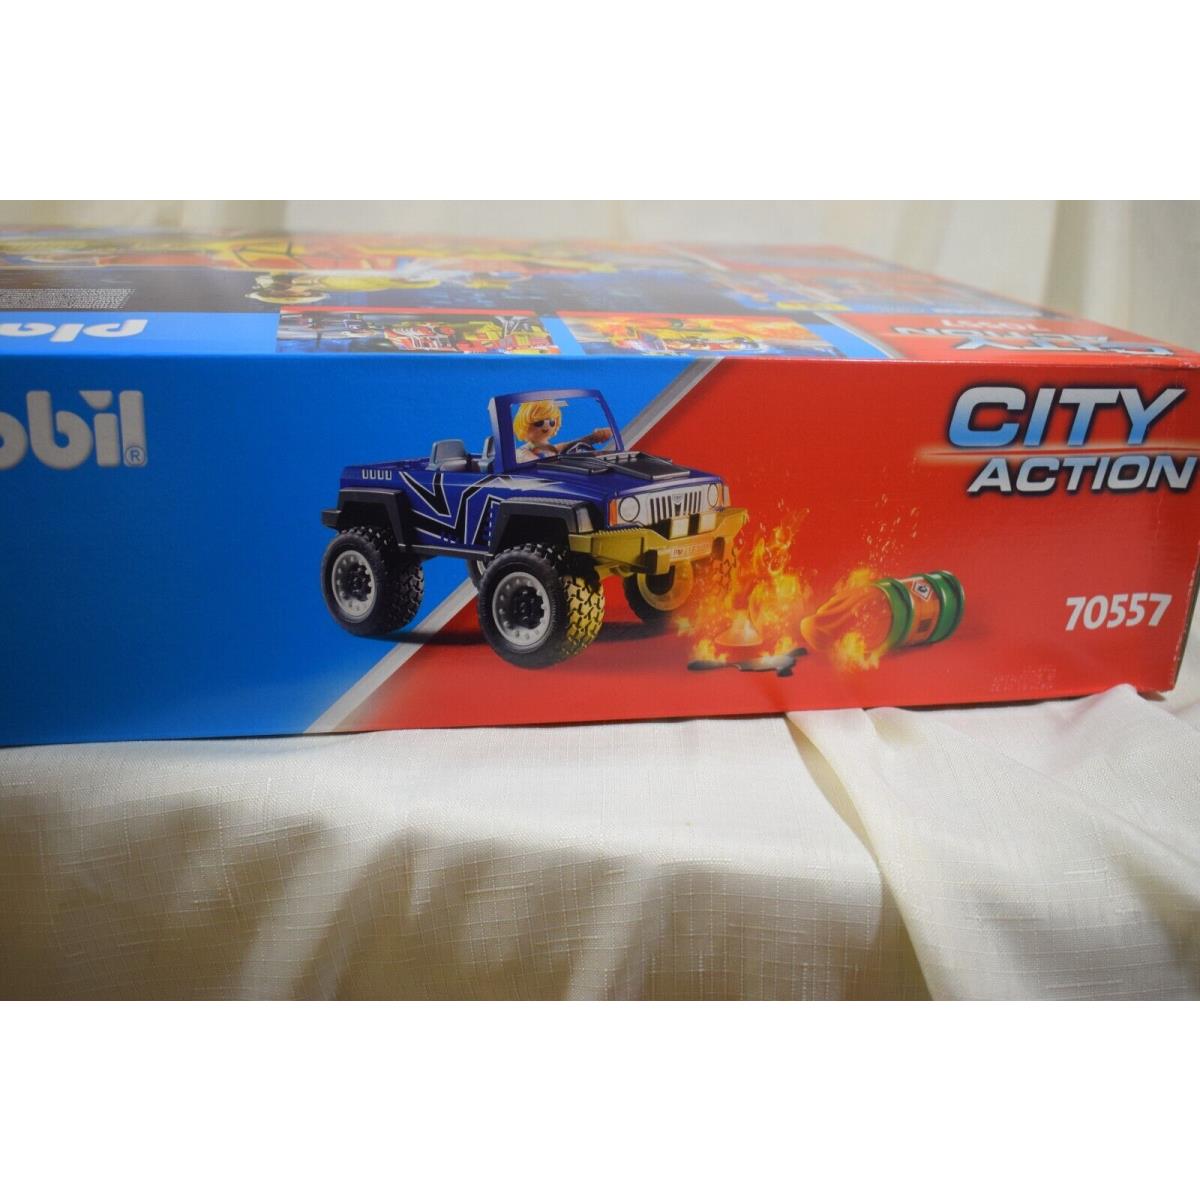 Playmobil City Action Fire Engine with Truck 189 Pcs 70557 822TT46